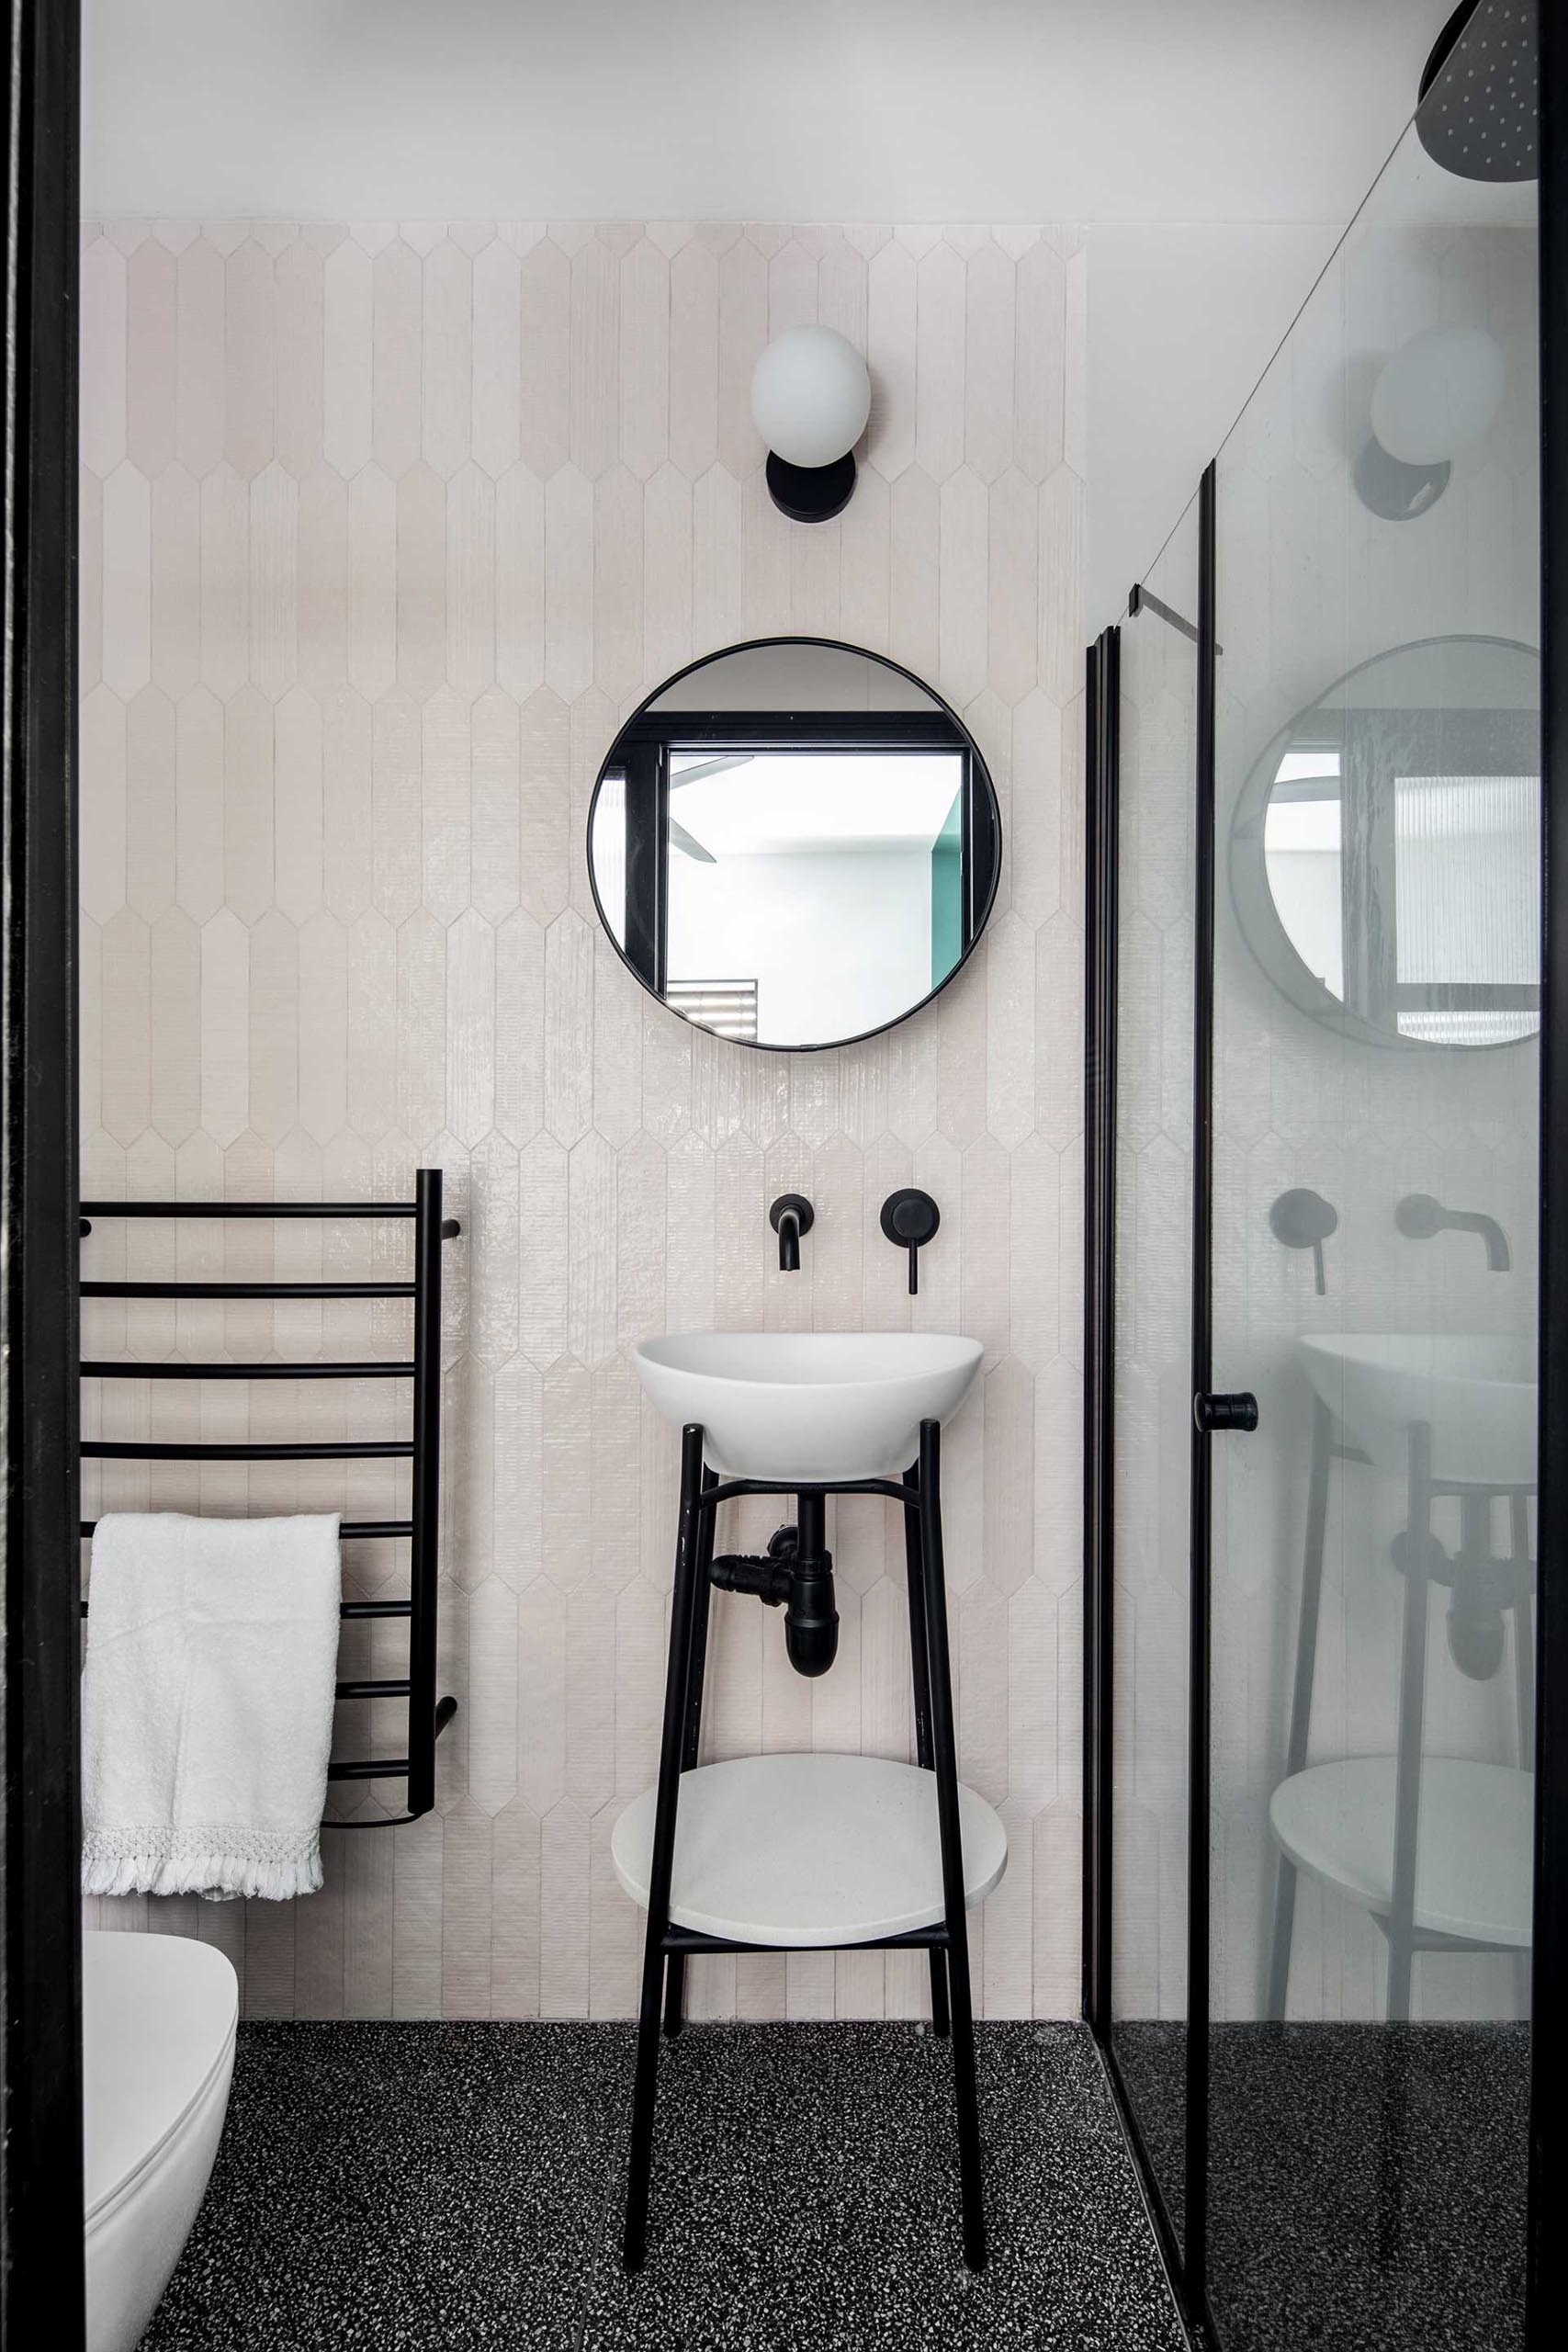 This modern bathroom includes pale pink tiles on the walls with black accents.